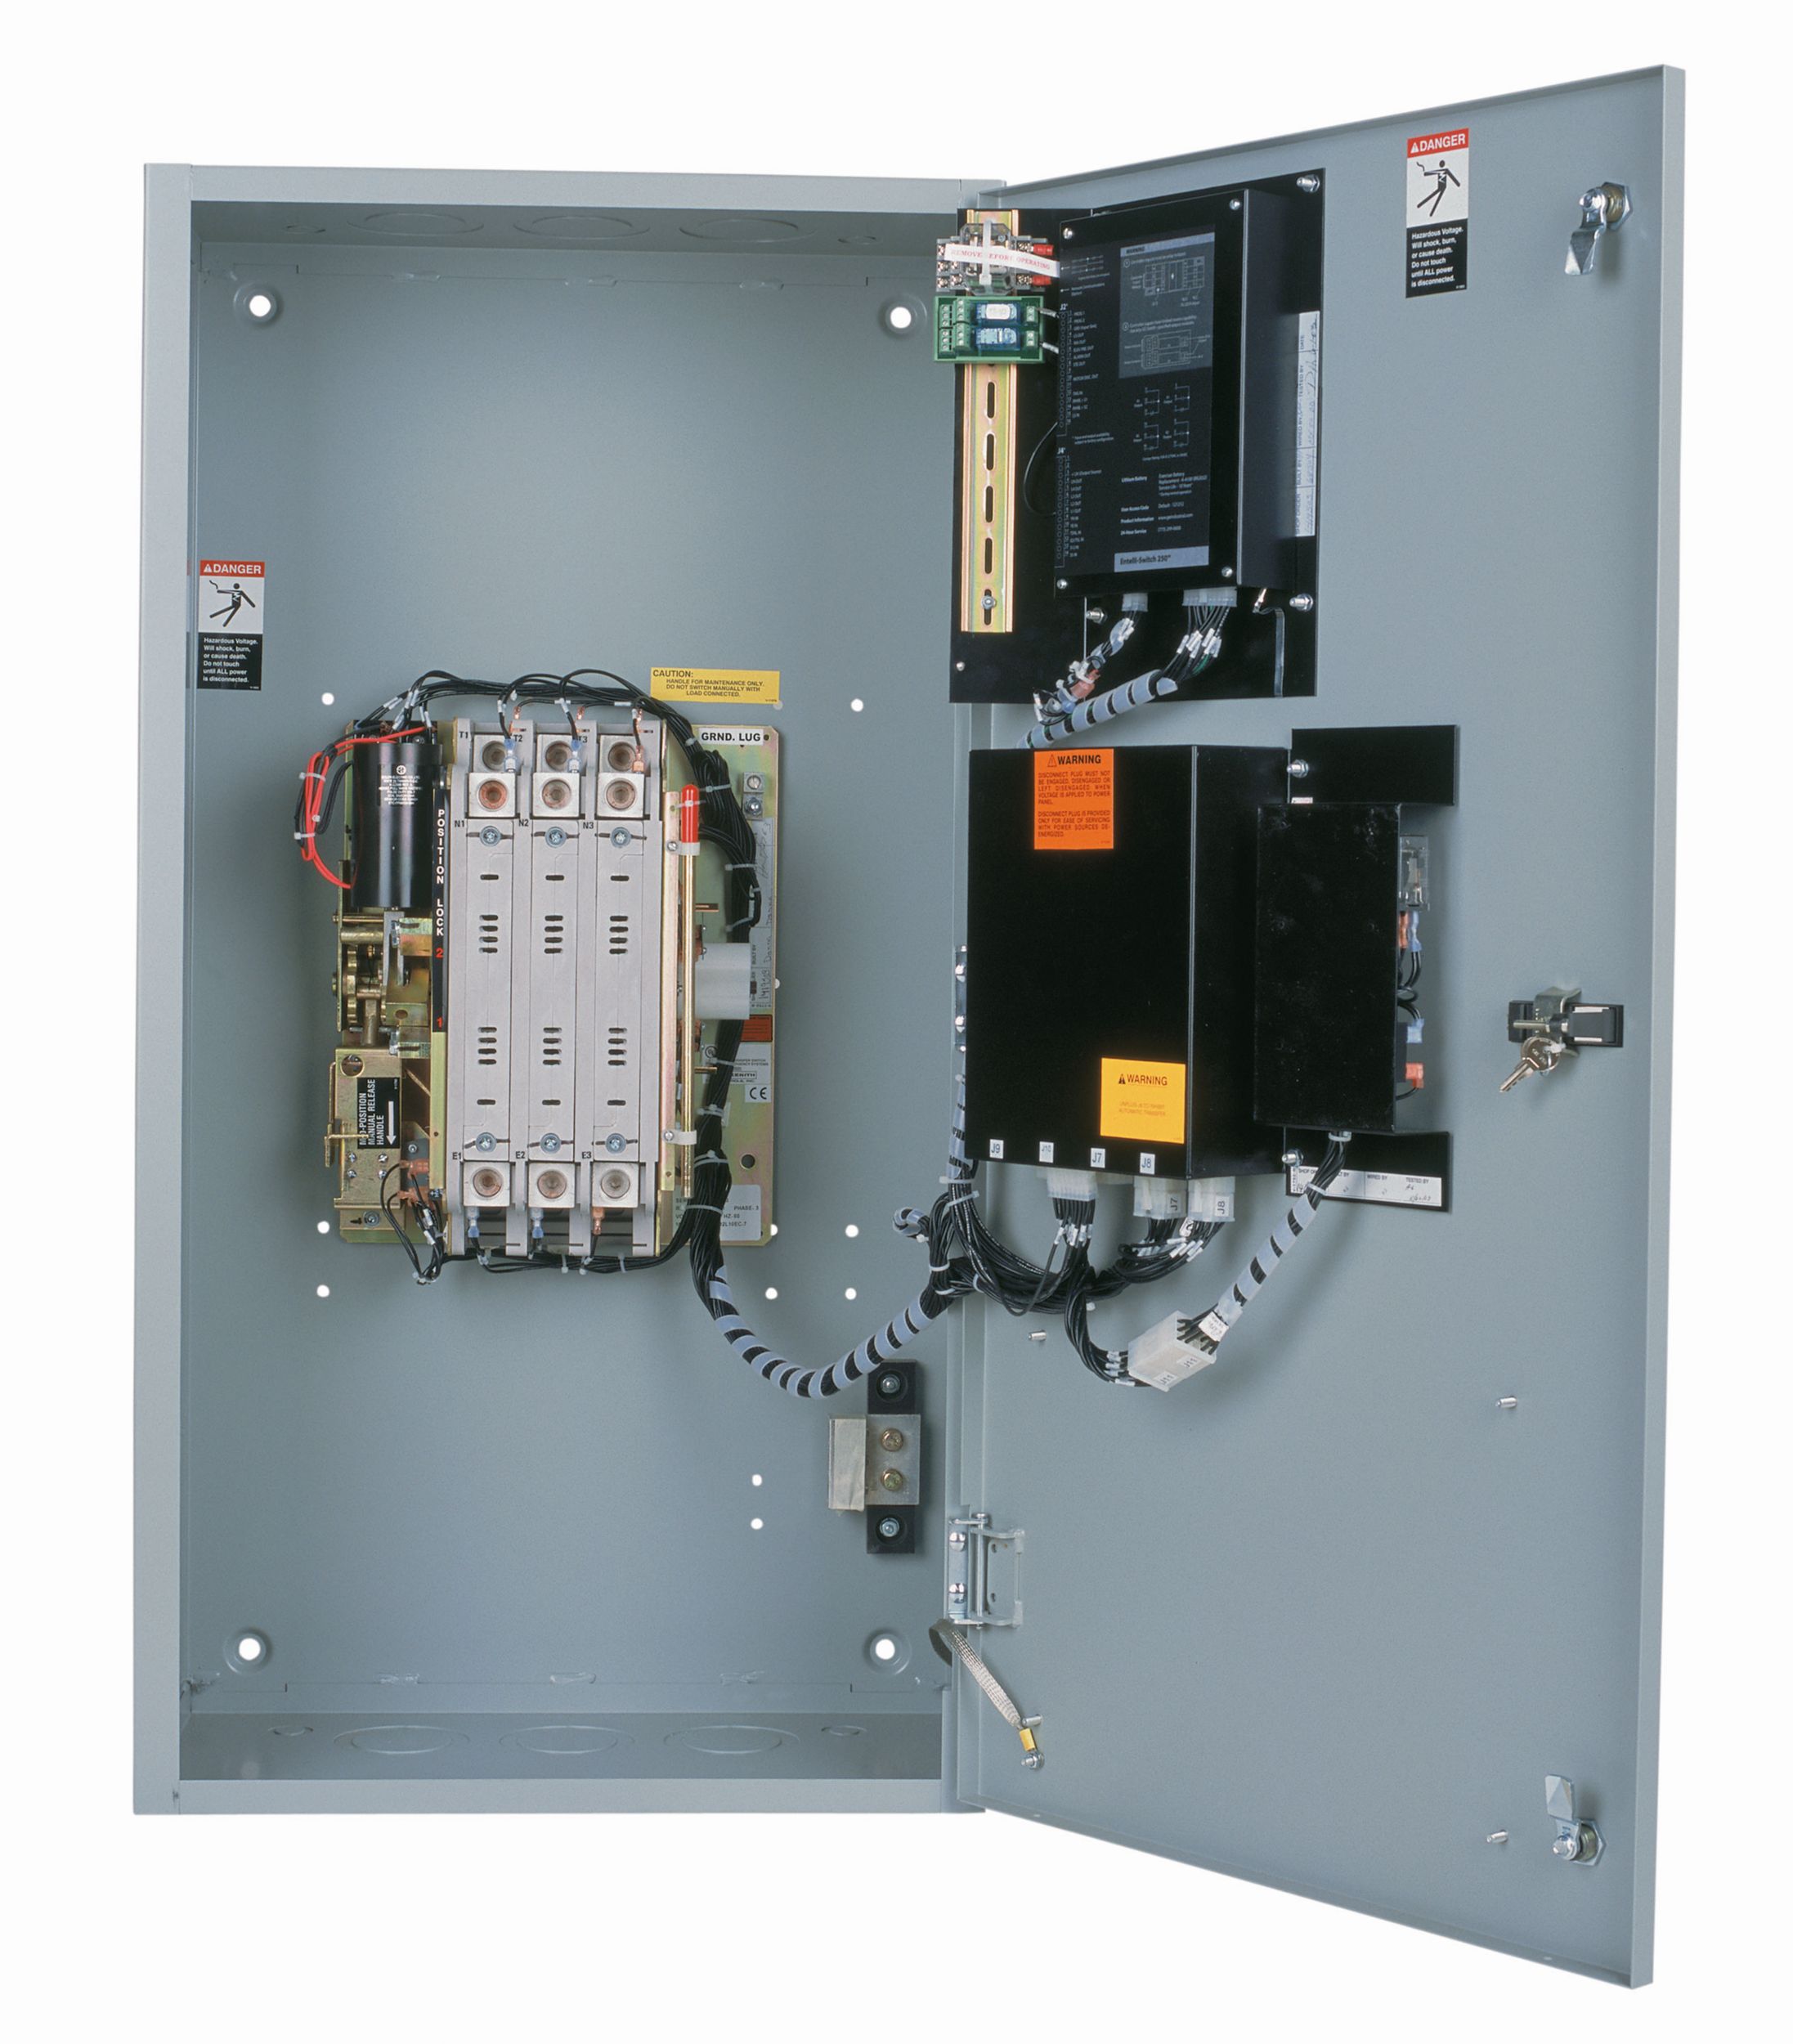 Cat | CTS Series Automatic Transfer Switch | Caterpillar network wiring guide 